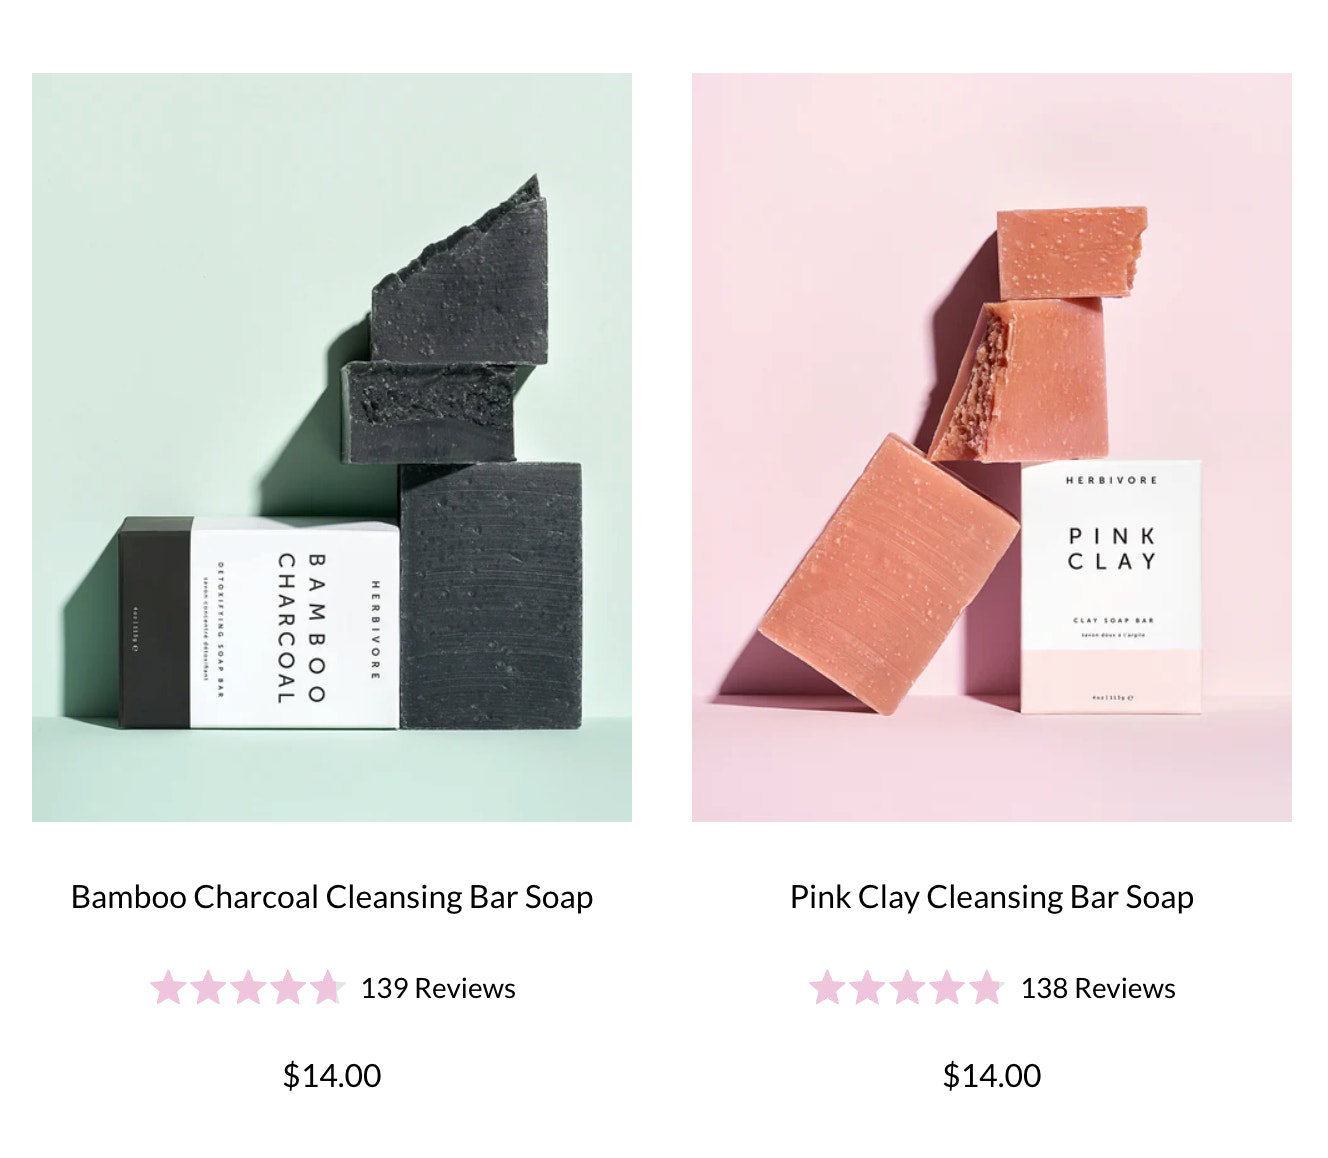 How Custom Soap Boxes Can Transform Your Soap Making Business